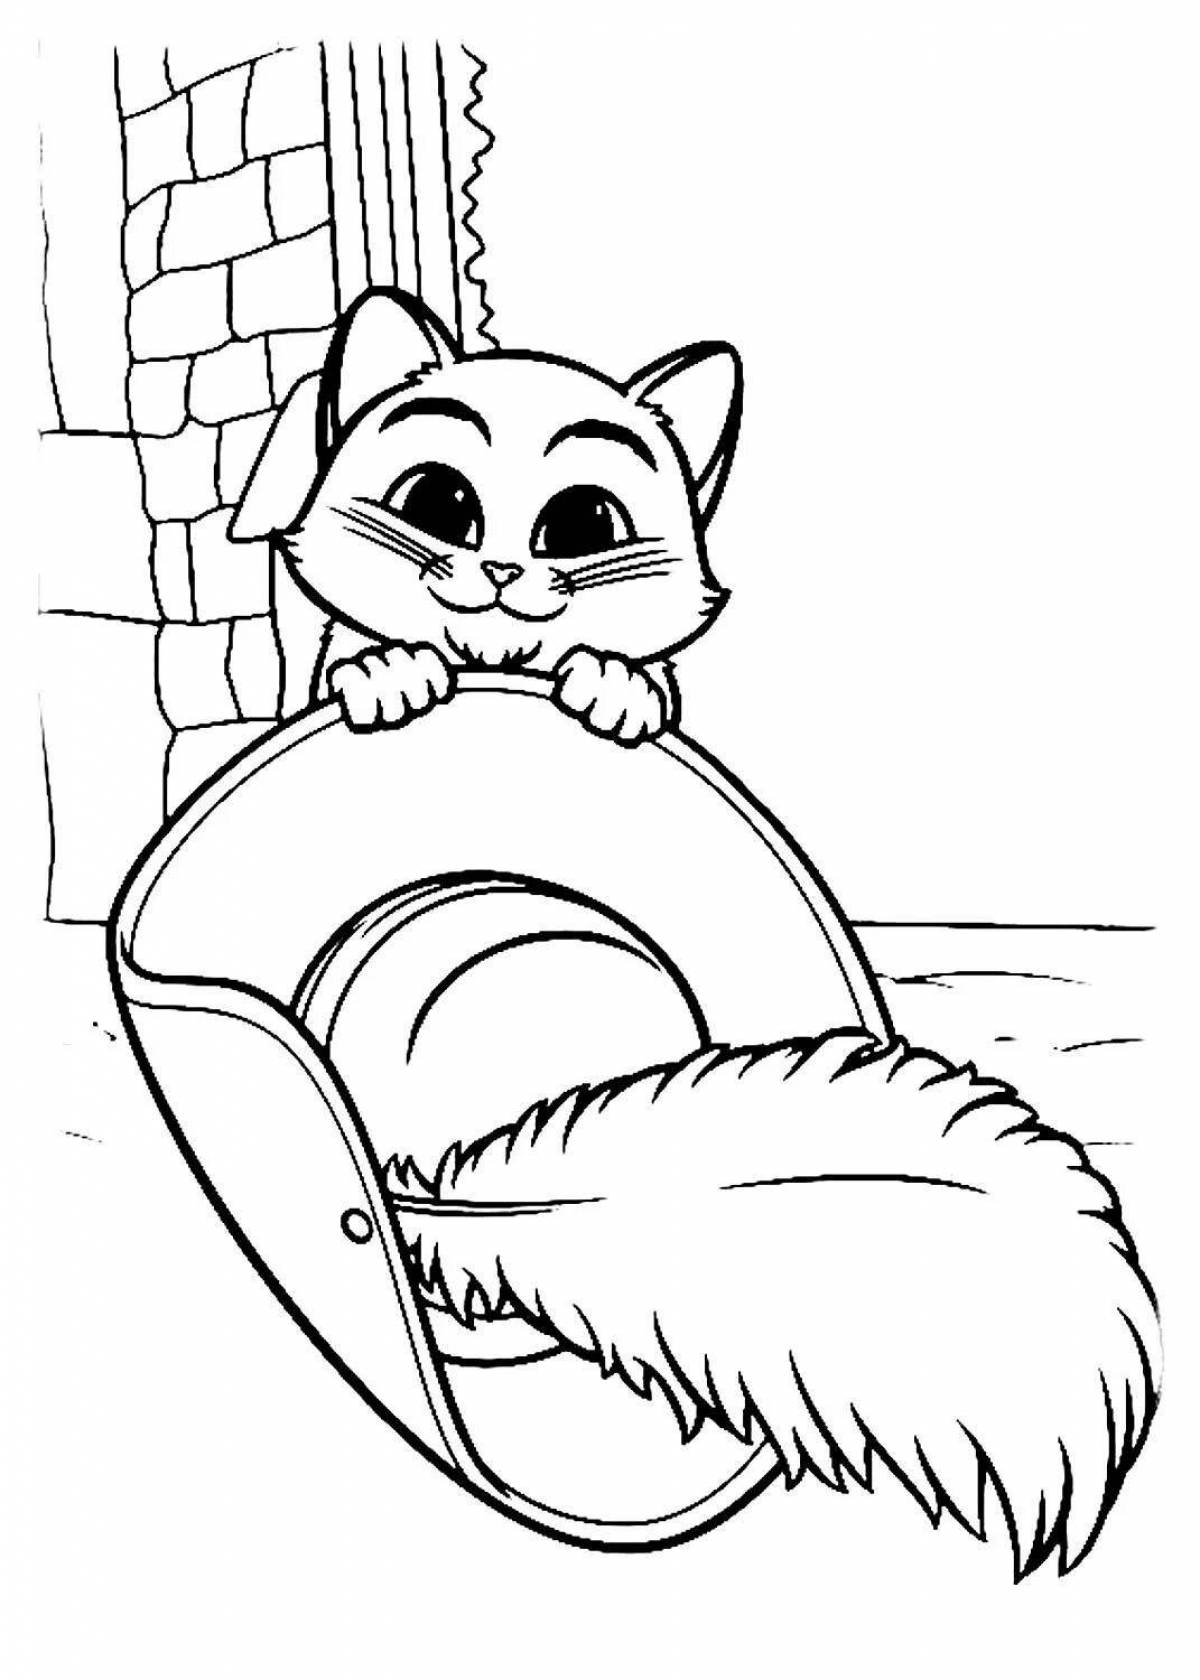 Cute puss in boots coloring book